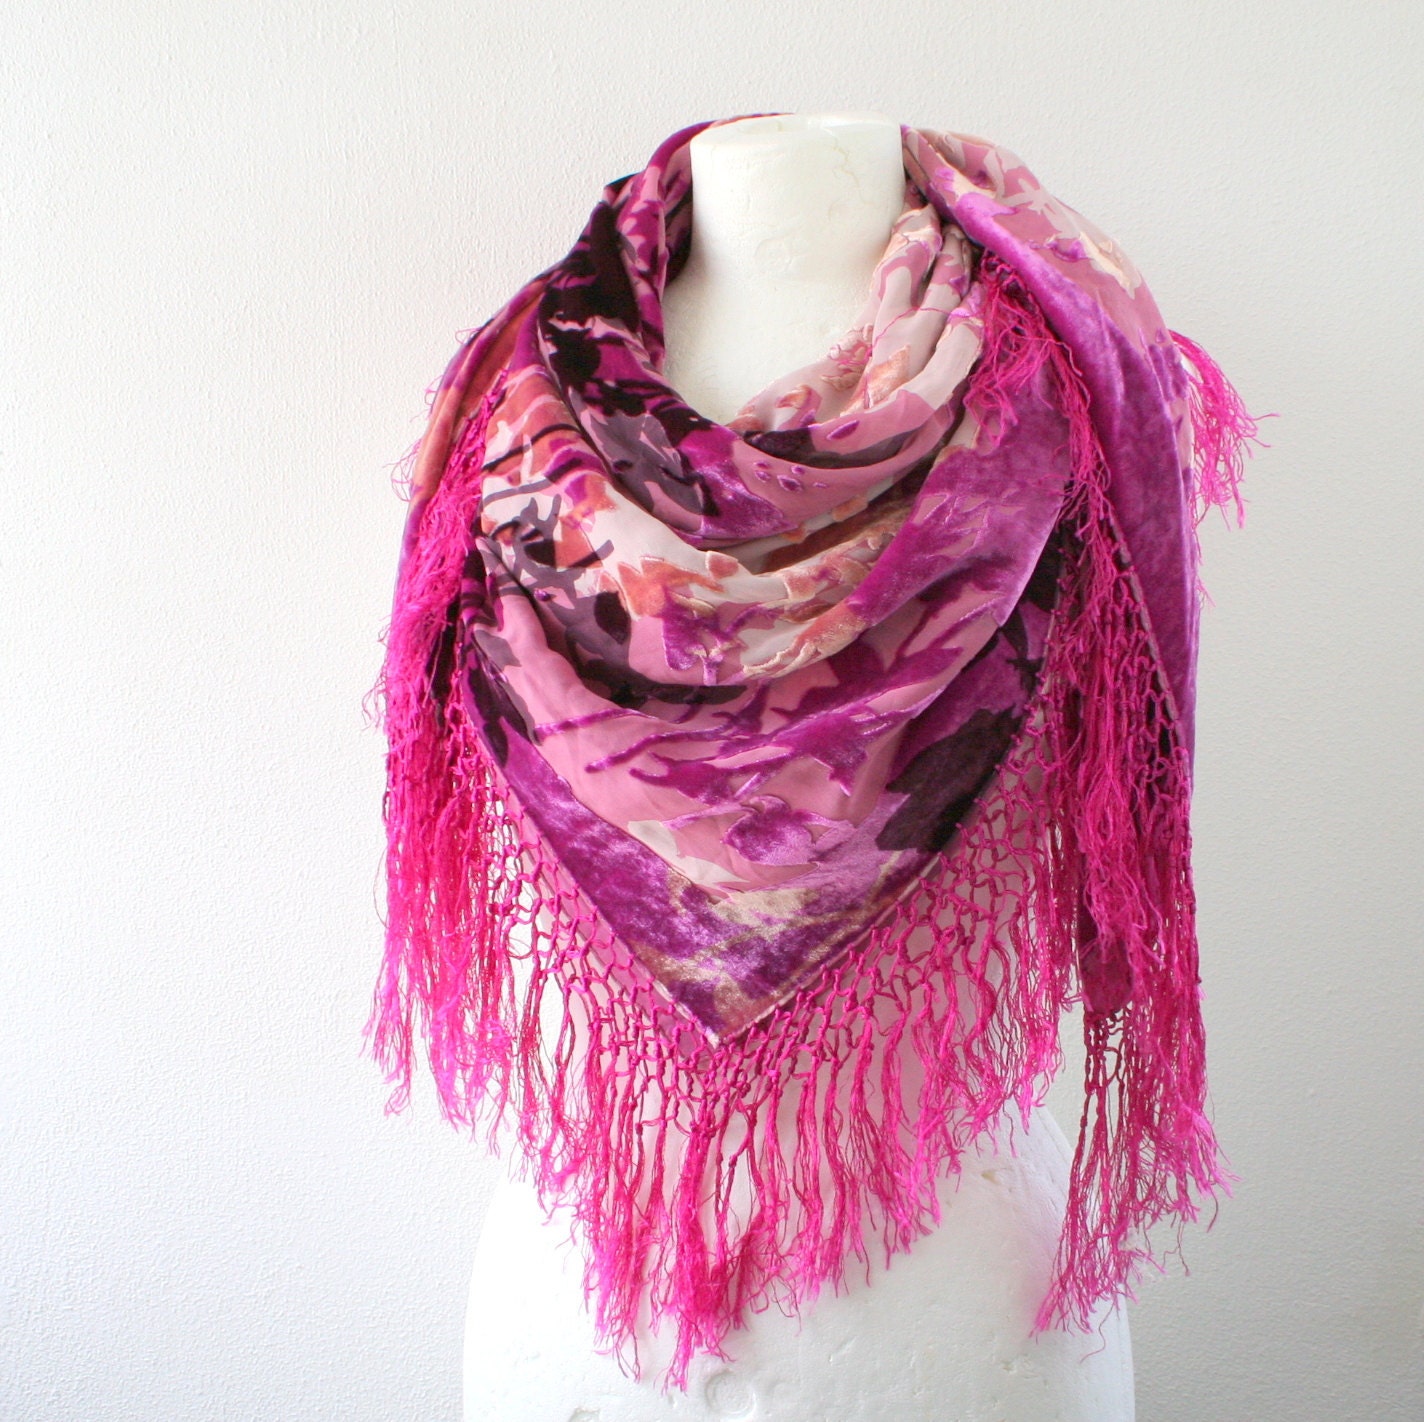 SALE 15% OFF Vintage fringe scarf in hot pink, purple and peach - chiffon and velvet - LilacCadillac